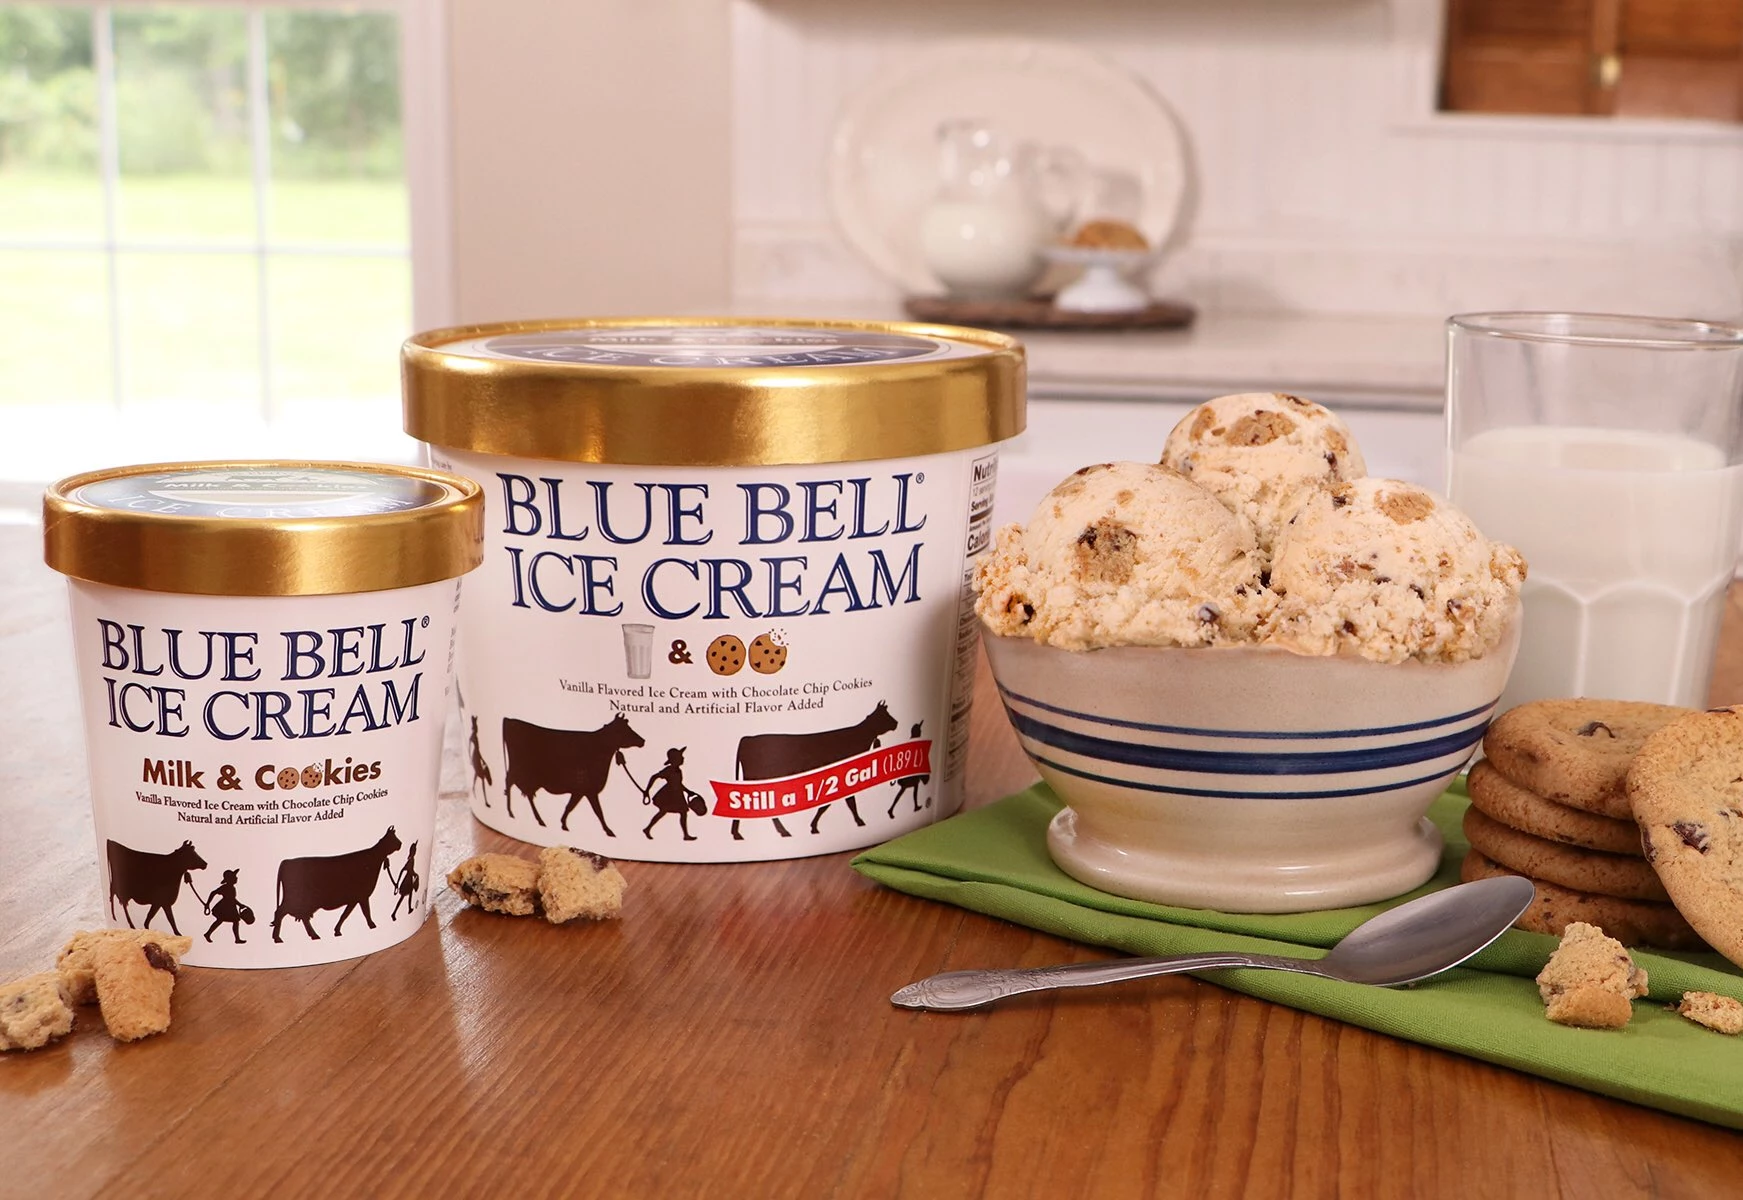 https://townsquare.media/site/156/files/2020/07/Blue-Bell-Milk-and-Cookies-Blue-Bell-via-Twitter.jpg